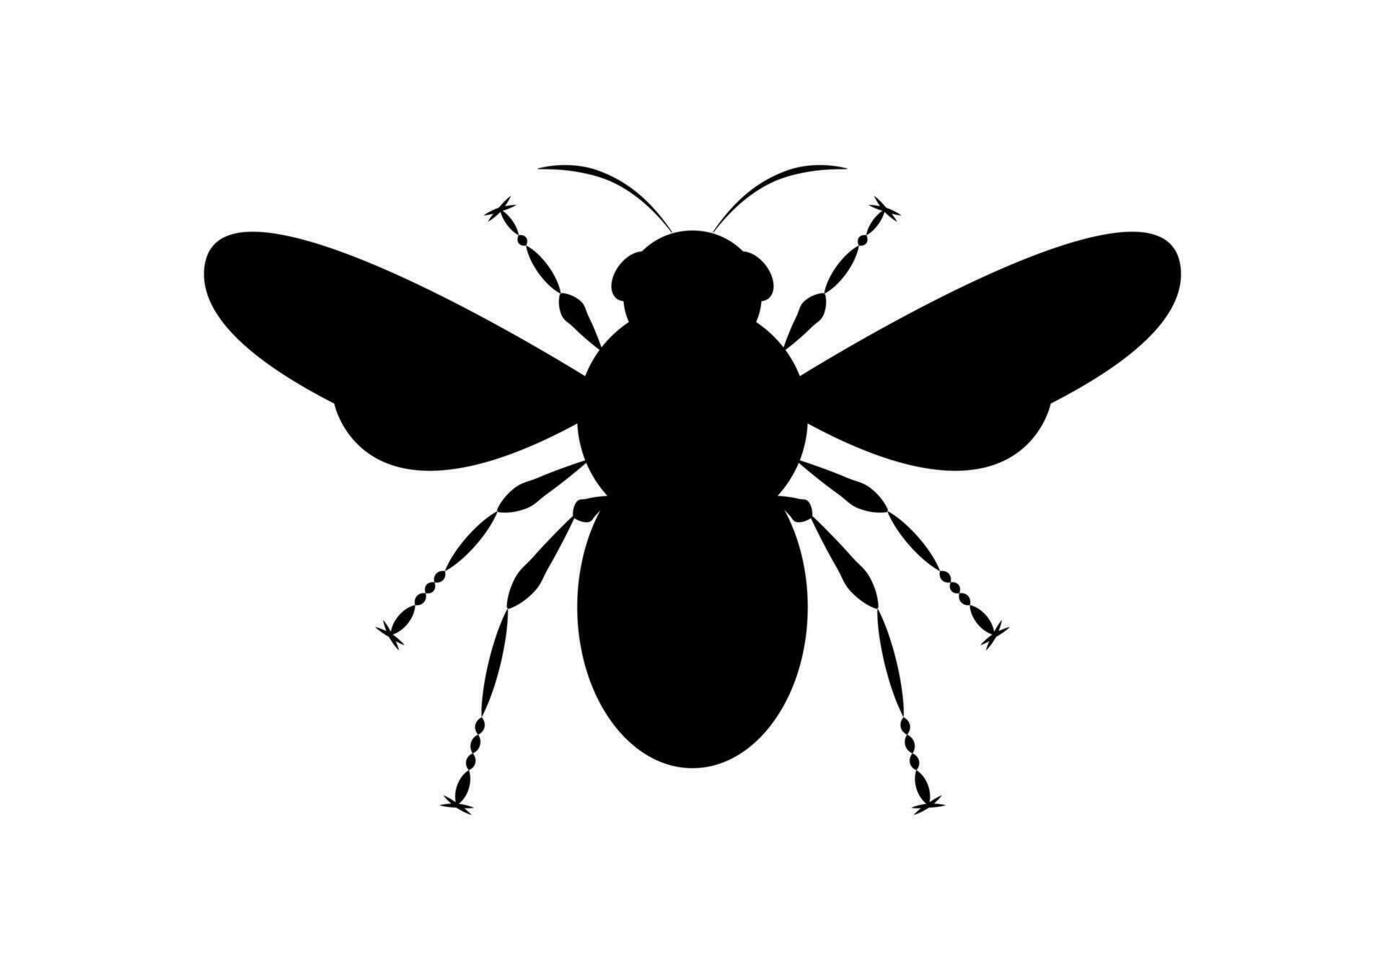 Black and White Bee Silhouette in Flat Style Vector